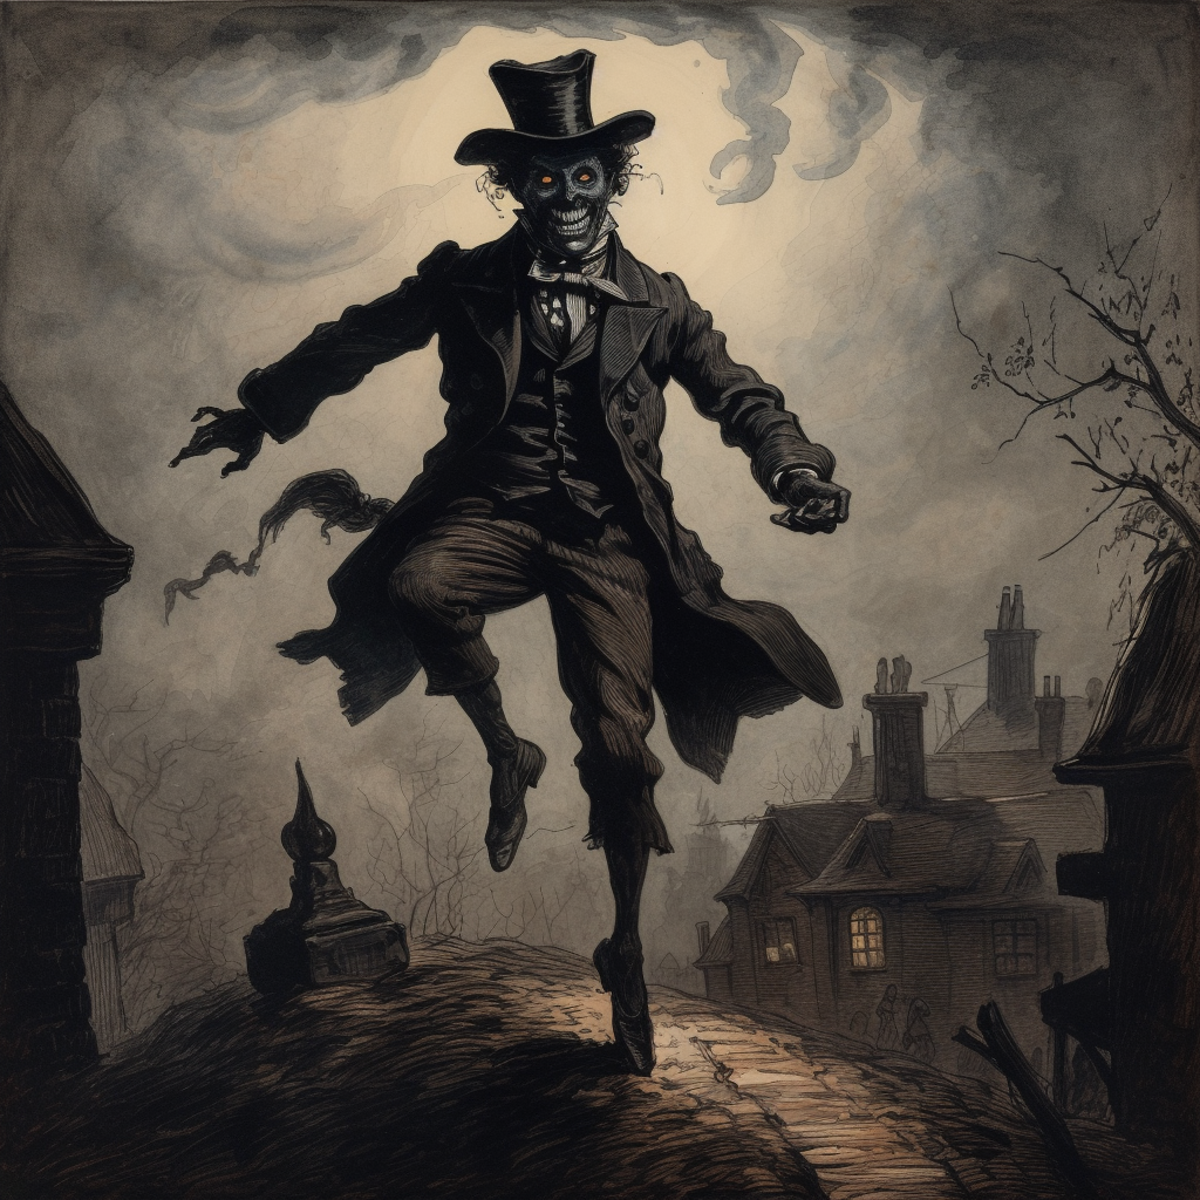 Who Was Spring Heeled Jack?